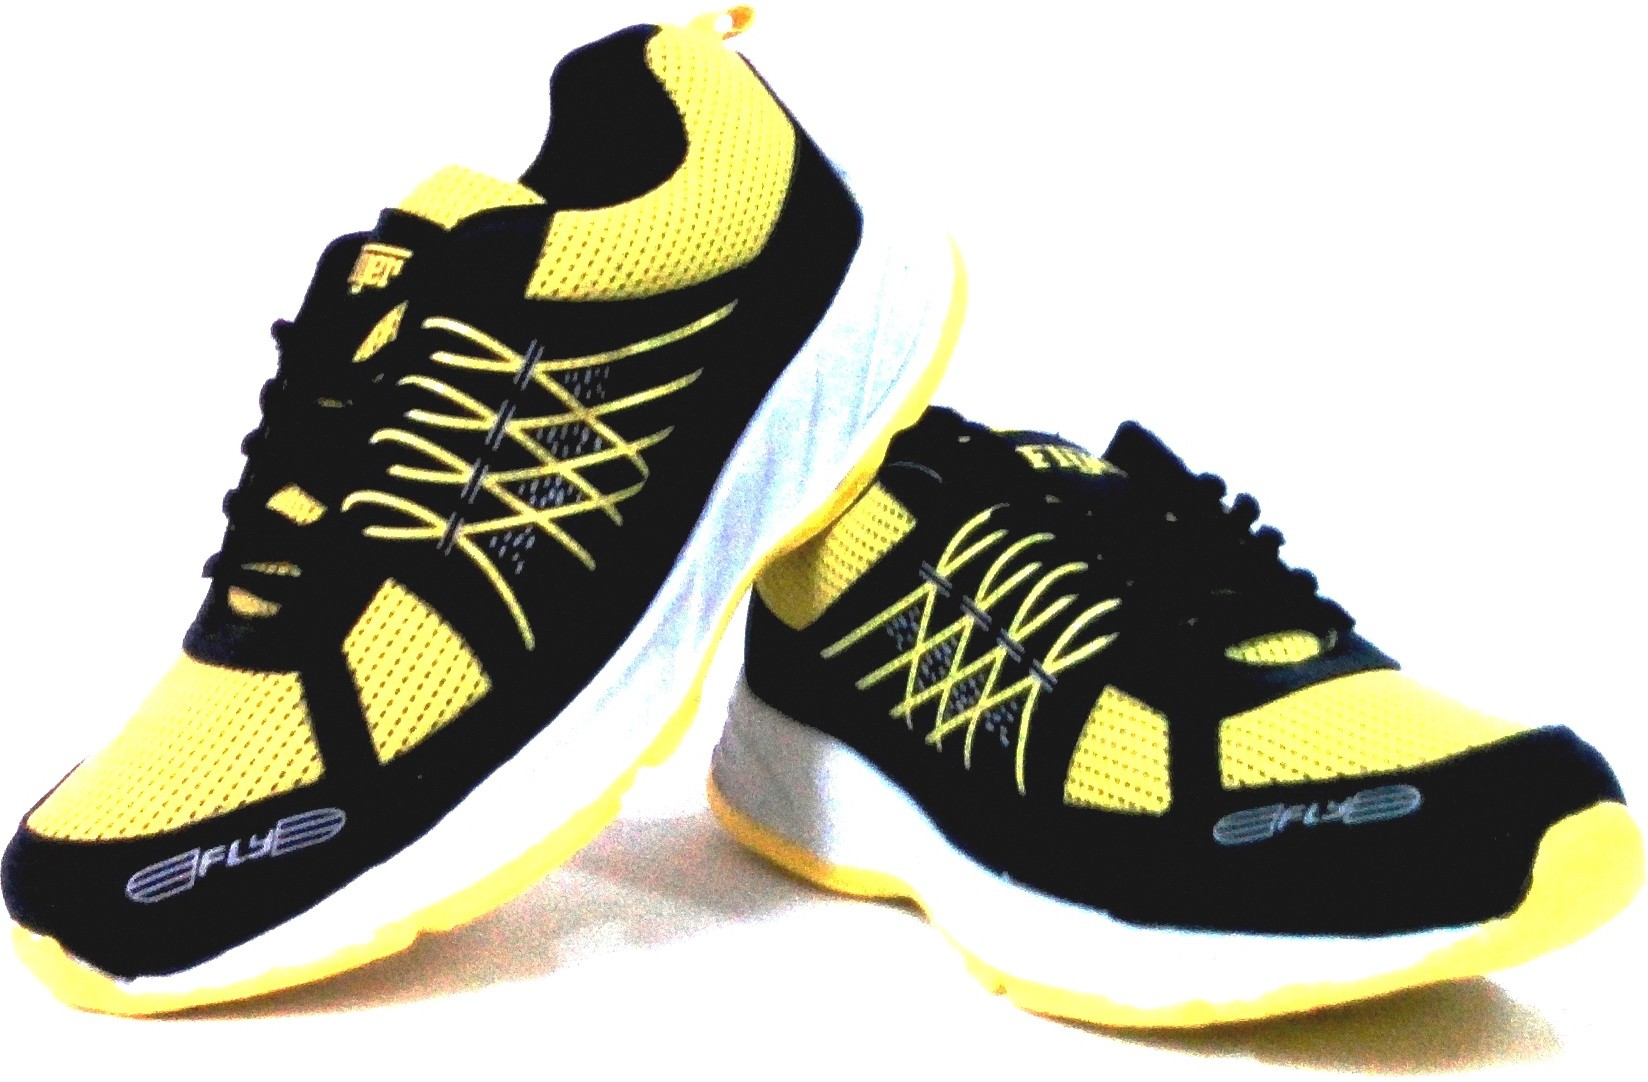 Flyer Football Shoes(Yellow)